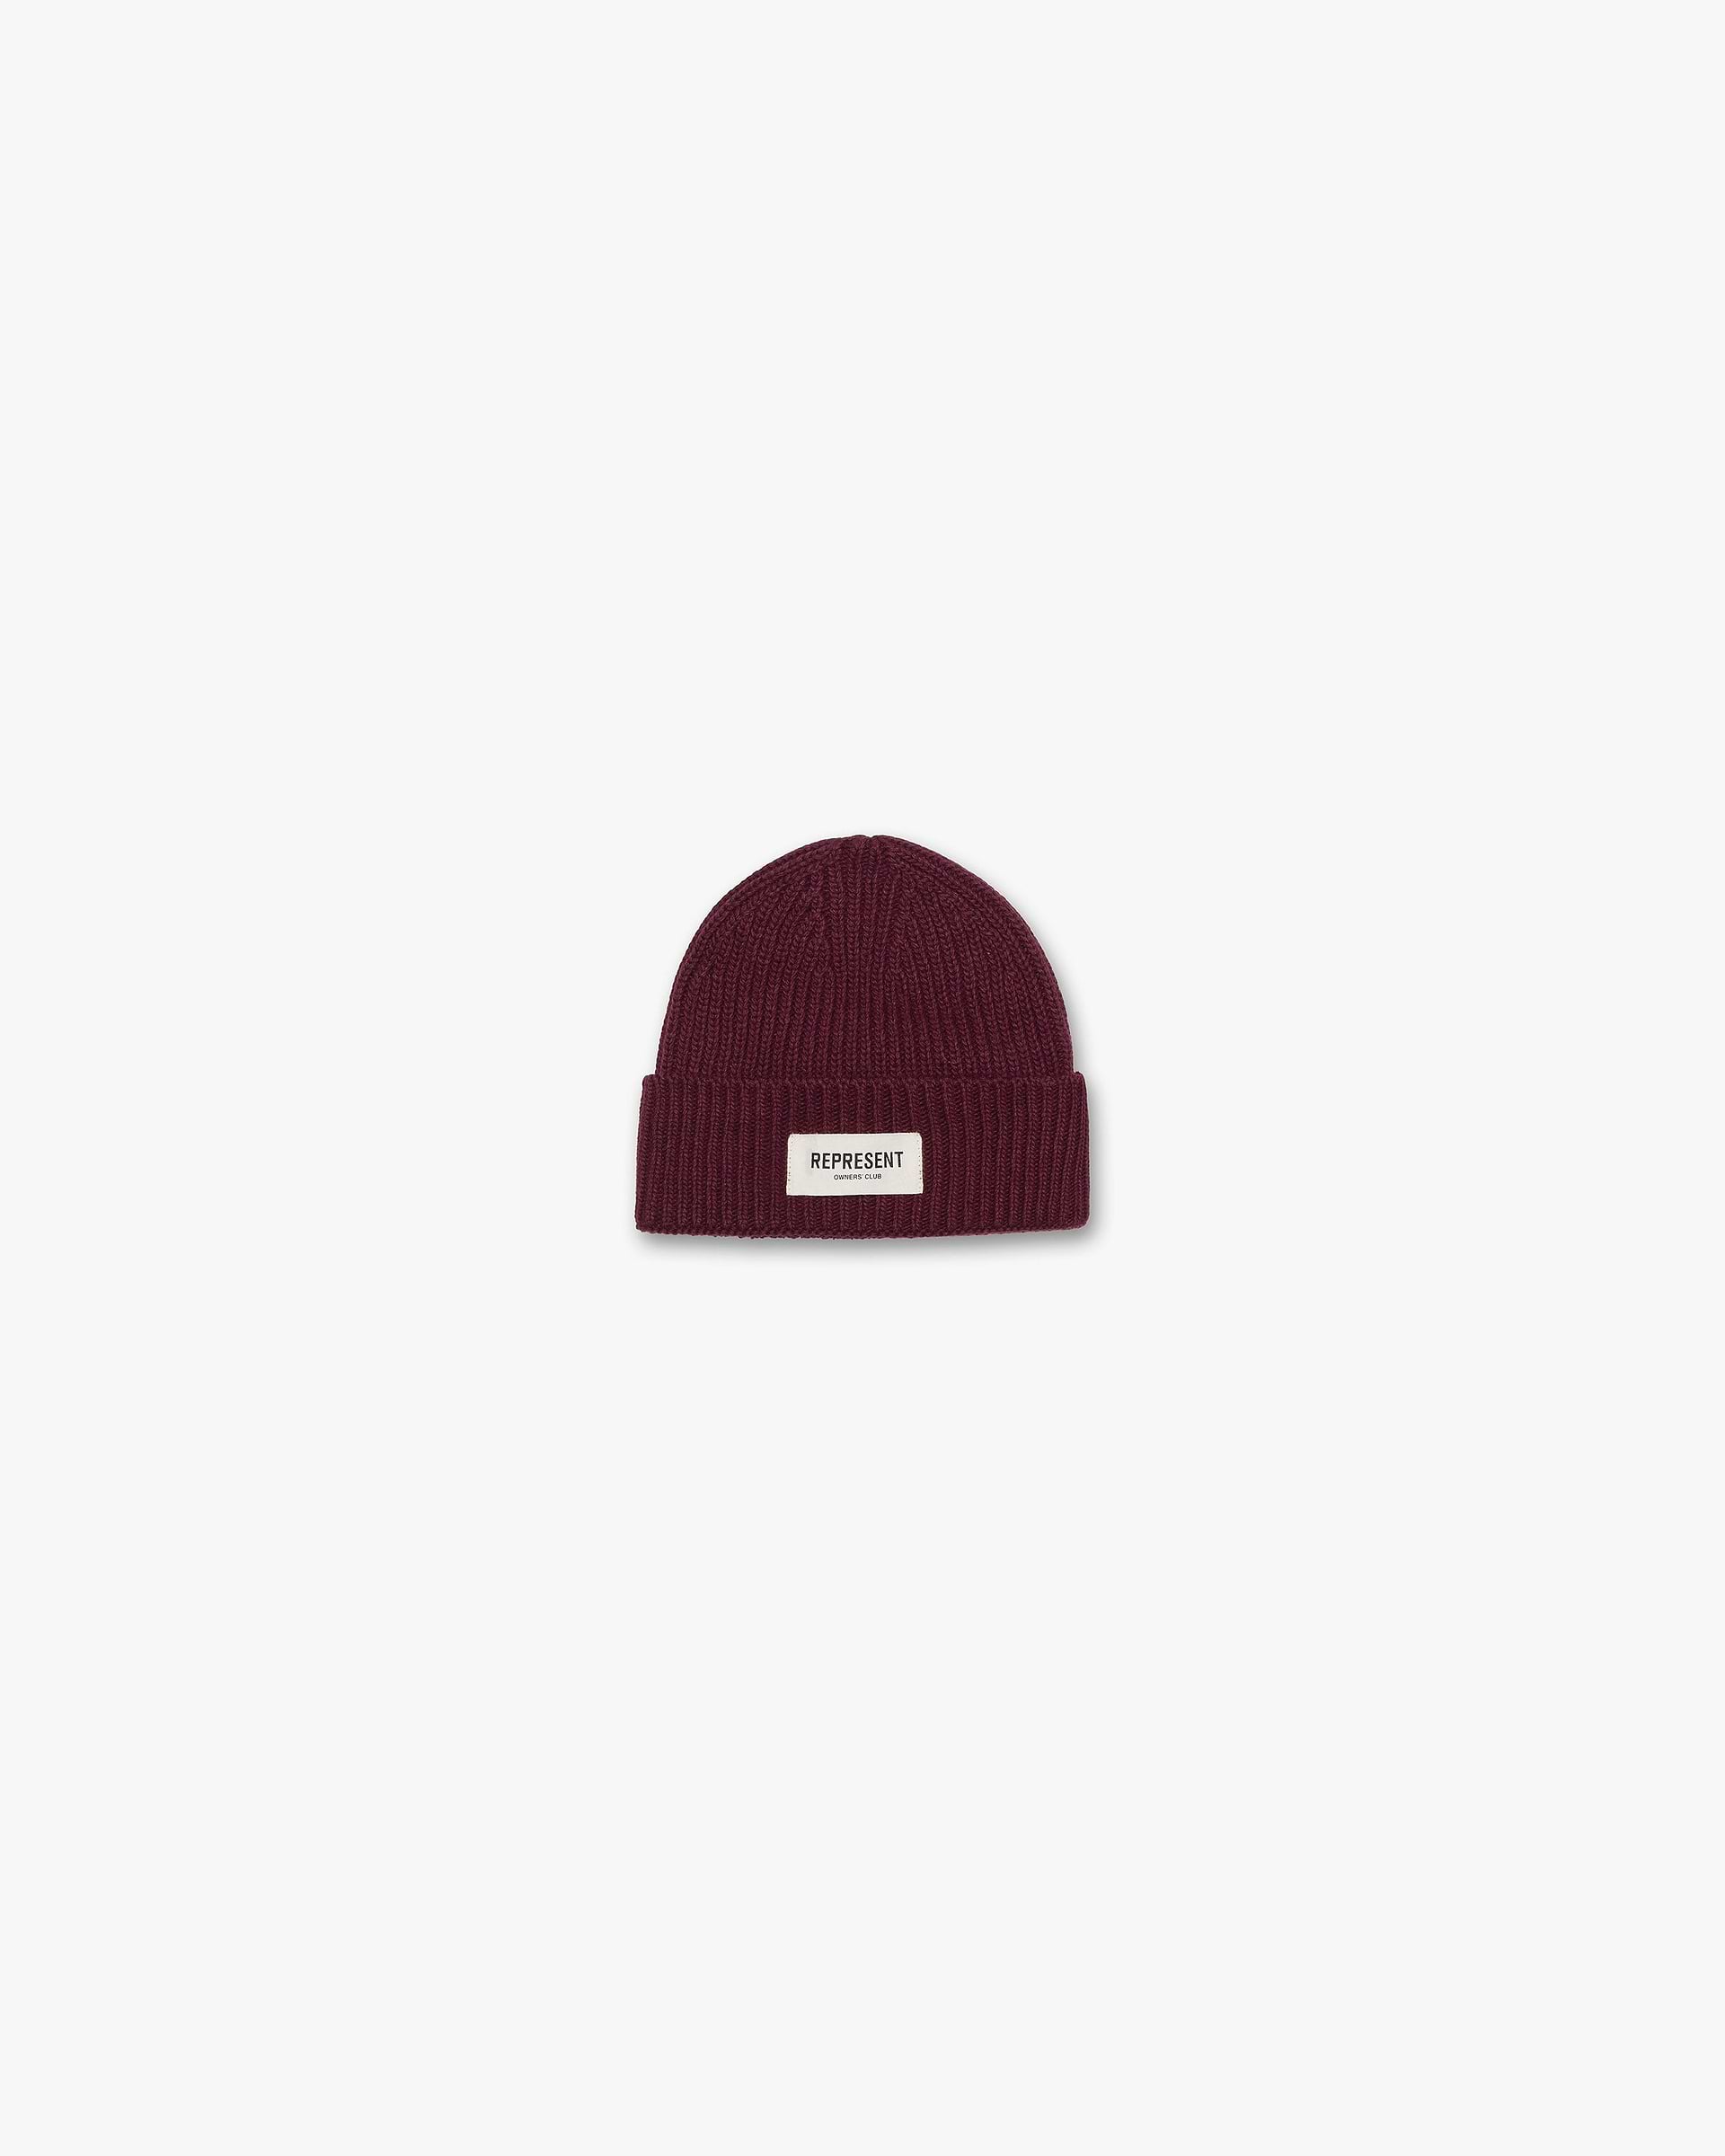 Represent Owners Club Beanie | Maroon Accessories Owners Club | Represent Clo